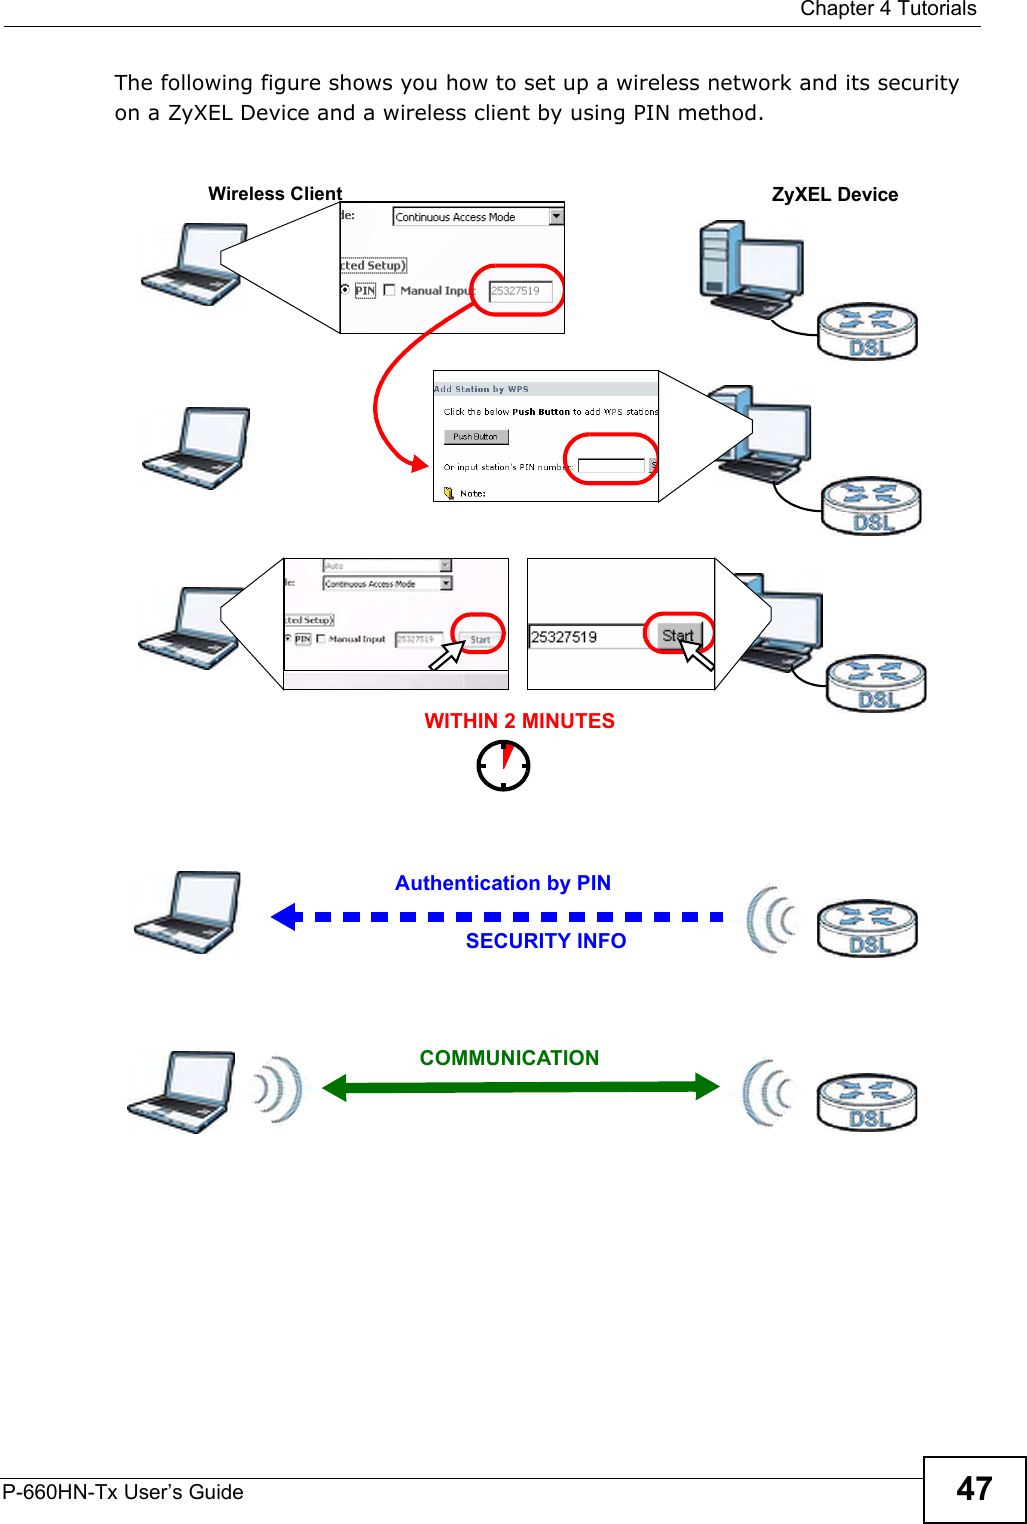  Chapter 4 TutorialsP-660HN-Tx User’s Guide 47The following figure shows you how to set up a wireless network and its security on a ZyXEL Device and a wireless client by using PIN method. Example WPS Process: PIN MethodAuthentication by PINSECURITY INFOWITHIN 2 MINUTESWireless ClientZyXEL DeviceCOMMUNICATION